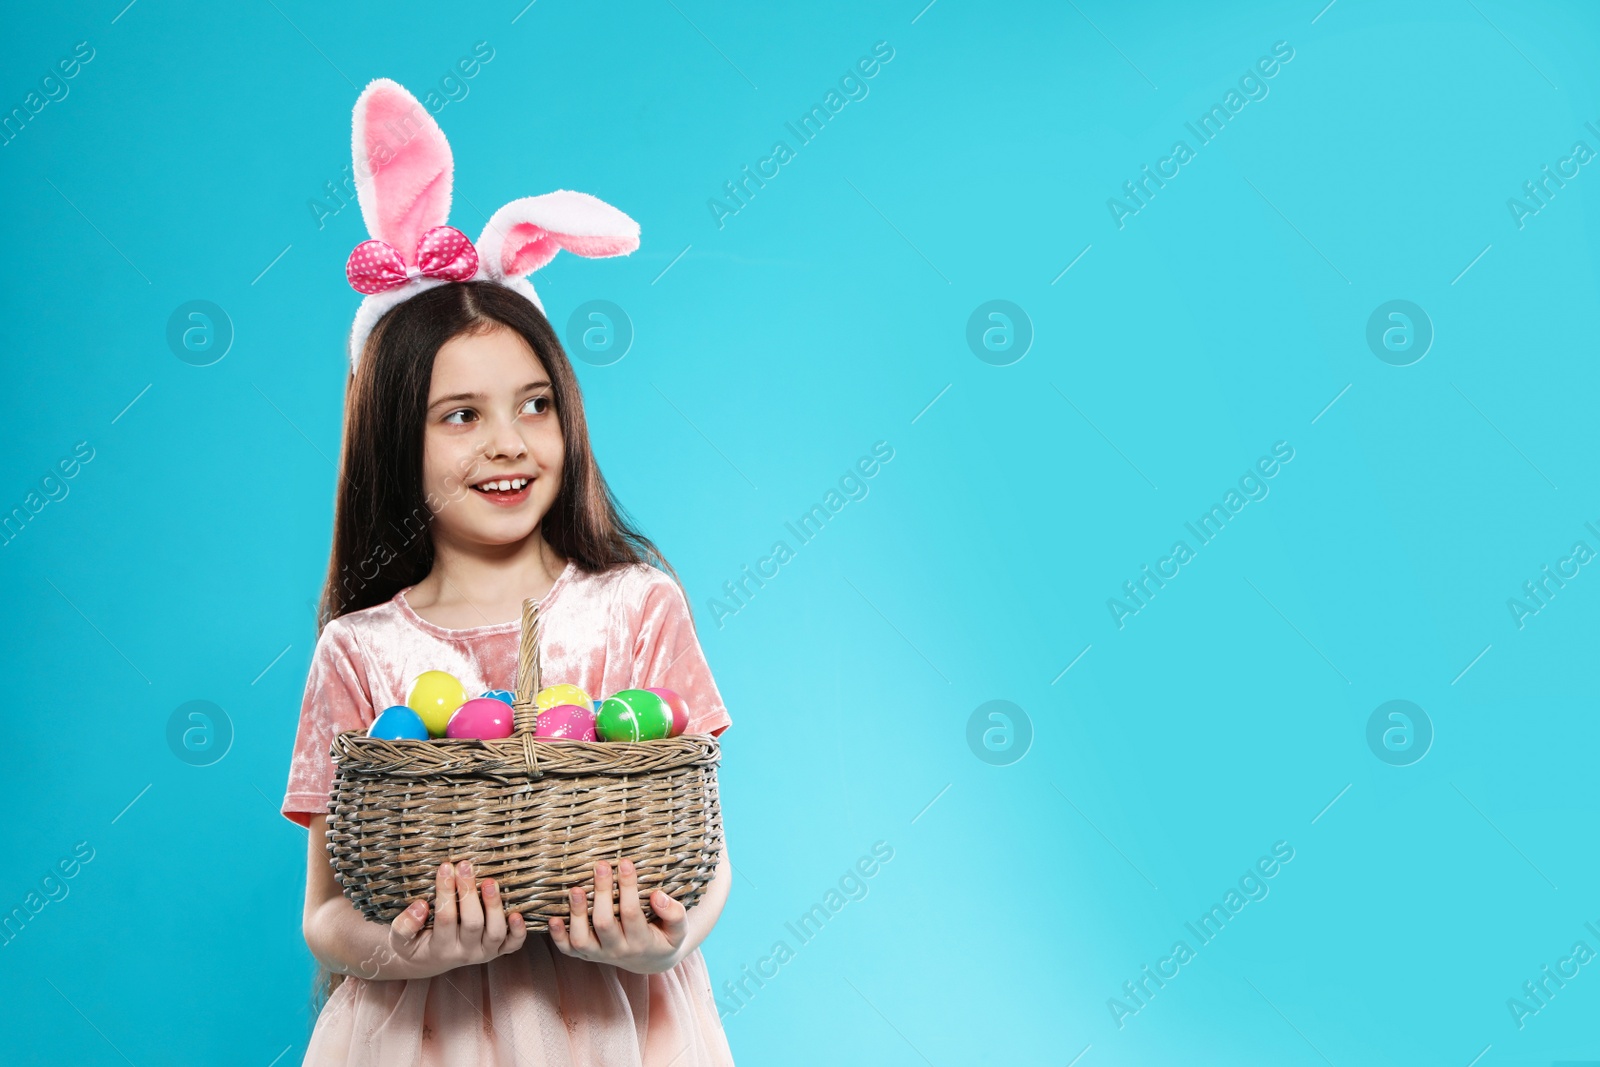 Photo of Little girl in bunny ears headband holding basket with Easter eggs on color background, space for text